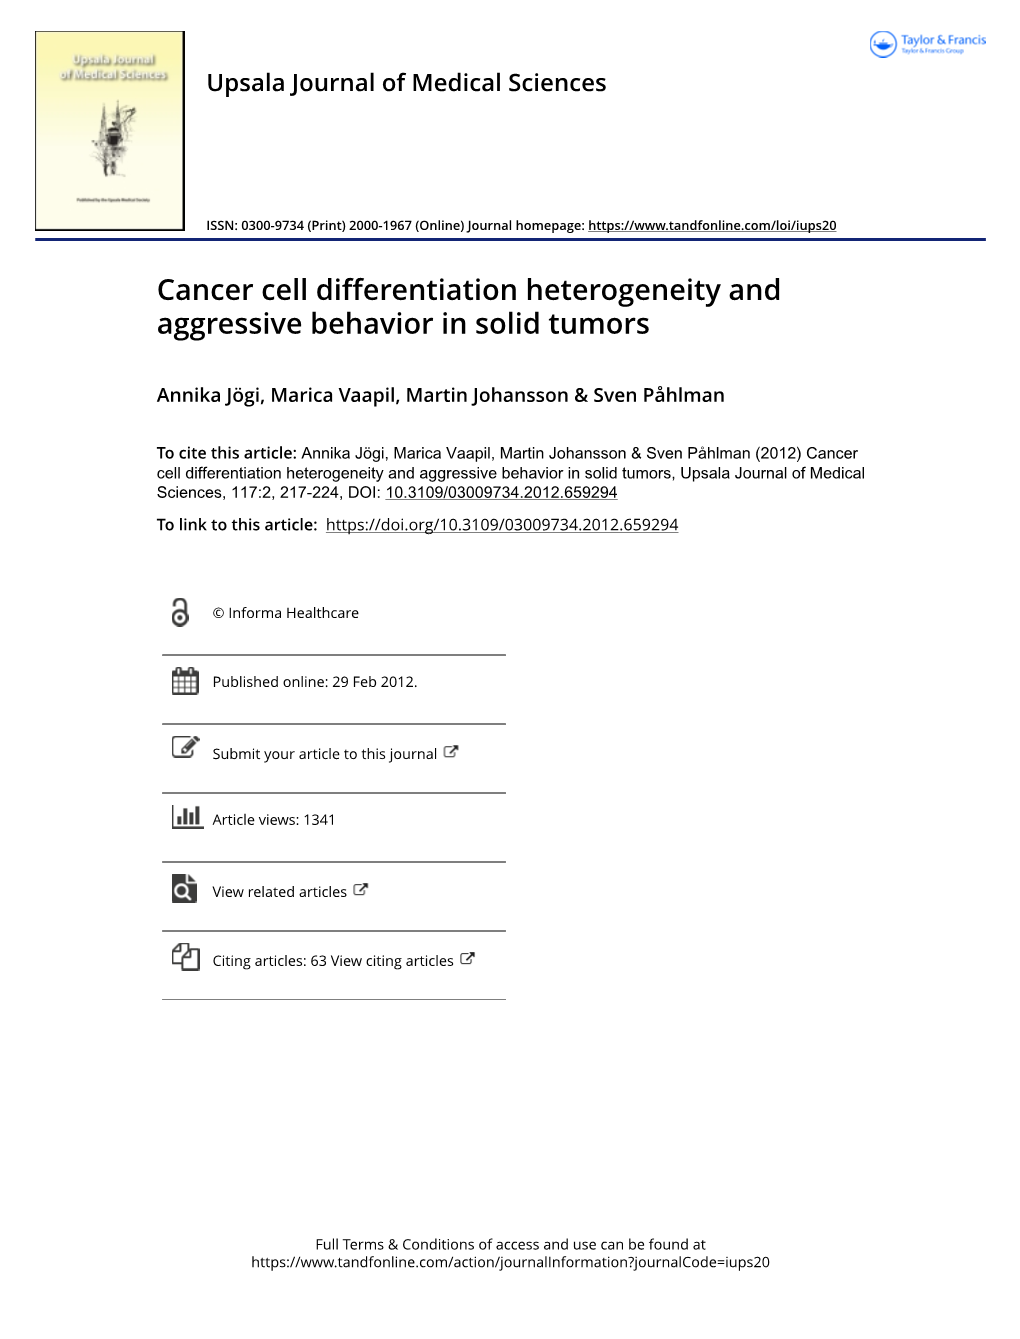 Cancer Cell Differentiation Heterogeneity and Aggressive Behavior in Solid Tumors